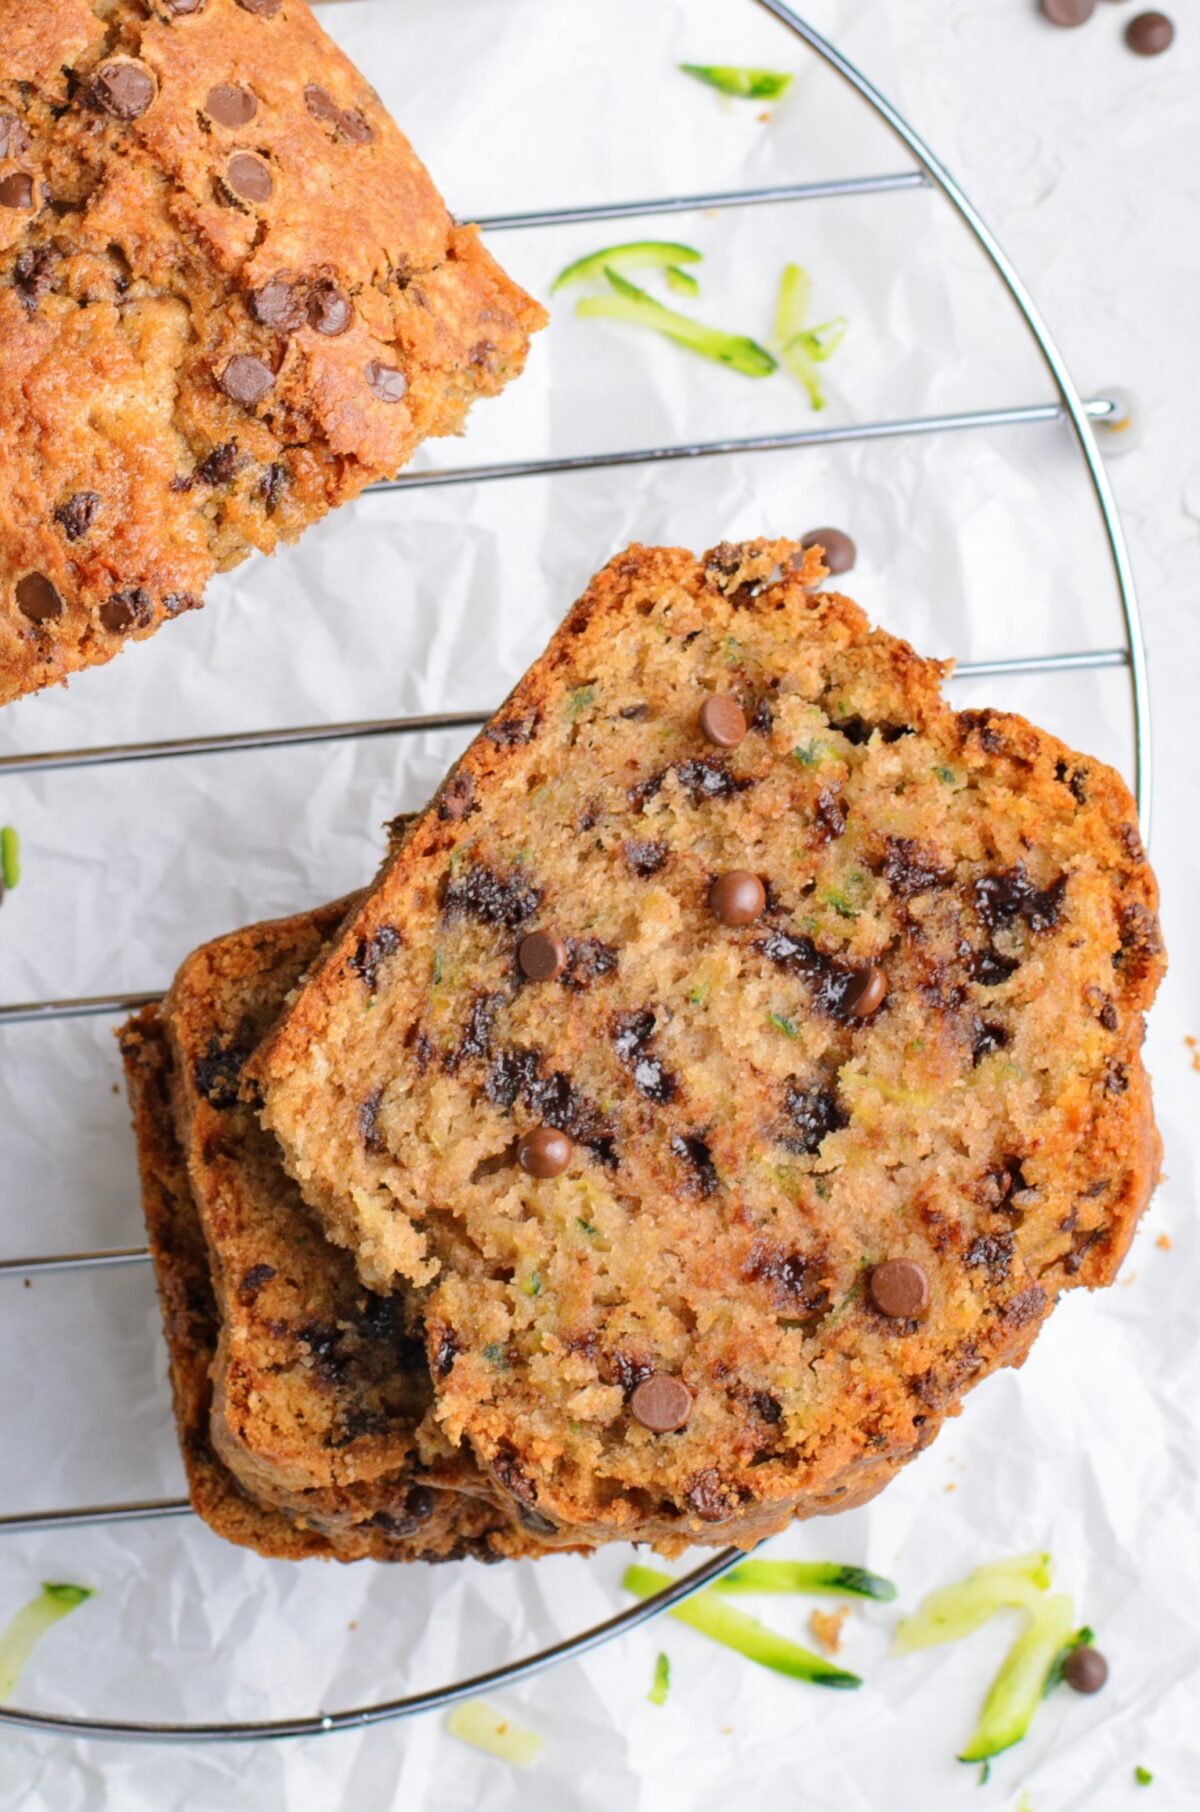 The BEST Chocolate Chip Zucchini Bread Recipe ever! Super moist, soft, and loaded with chocolate chips; it's a tasty way to use up zucchini.